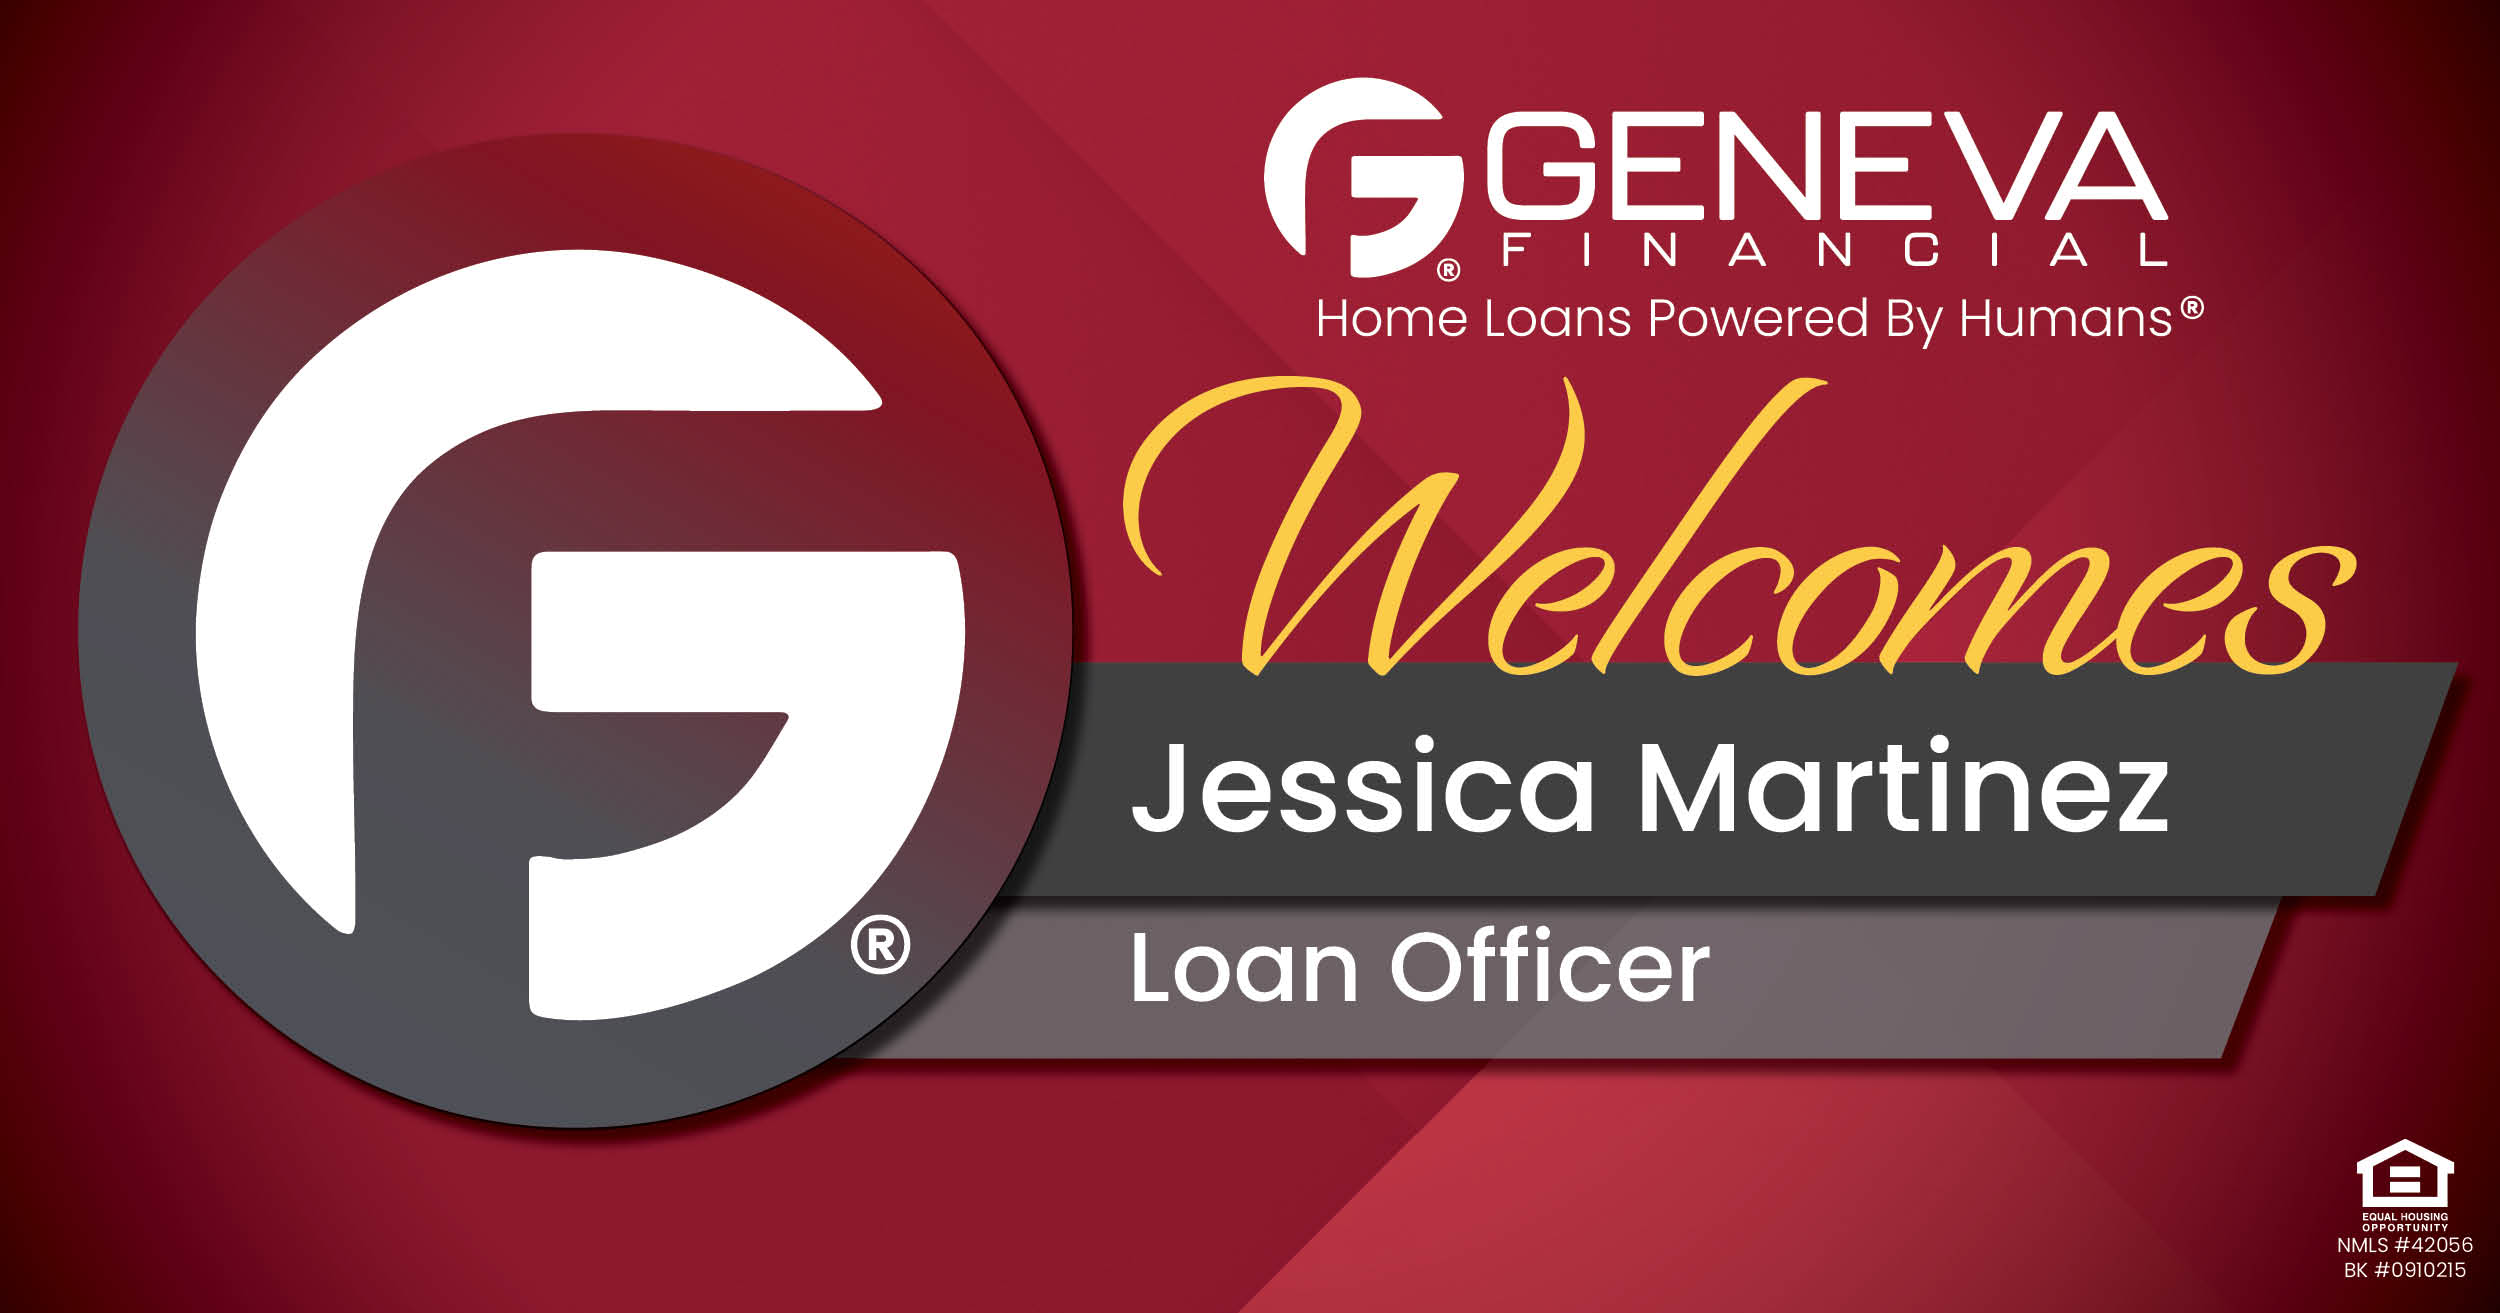 Geneva Financial Welcomes New Loan Officer Jessica Martinez to Aliso Viejo, CA – Home Loans Powered by Humans®.